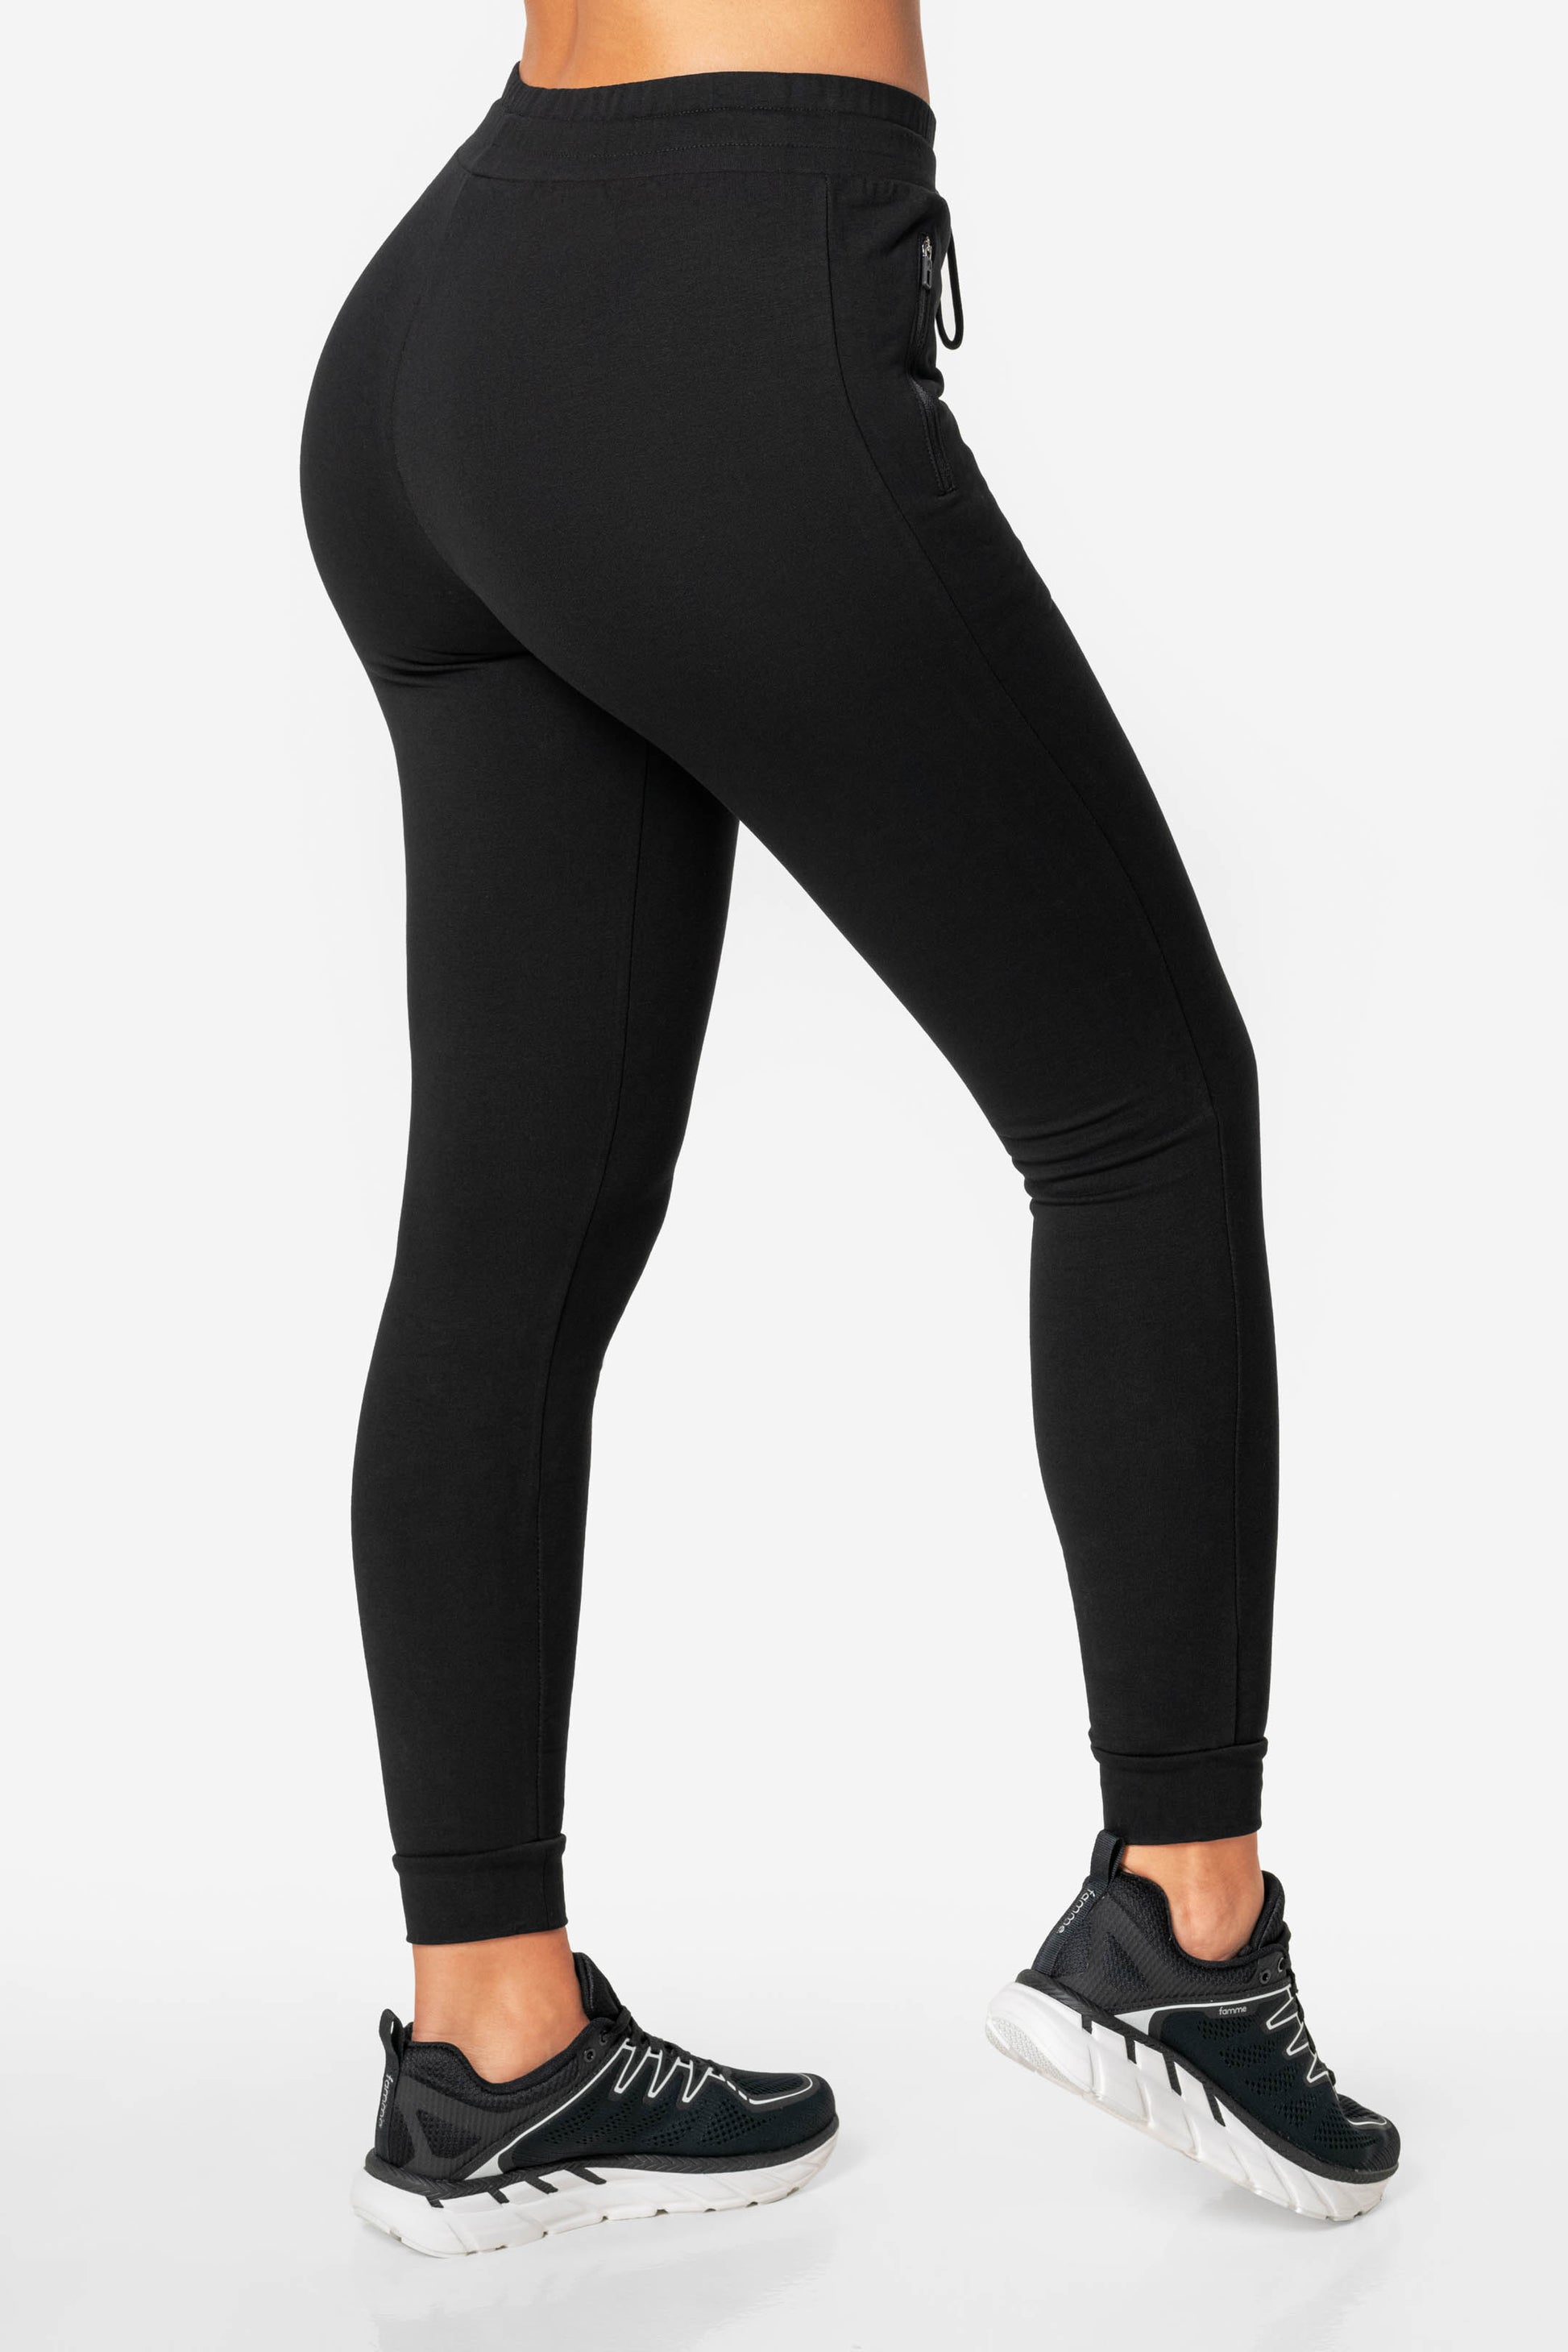 Joggers for ladies, comfortable & soft